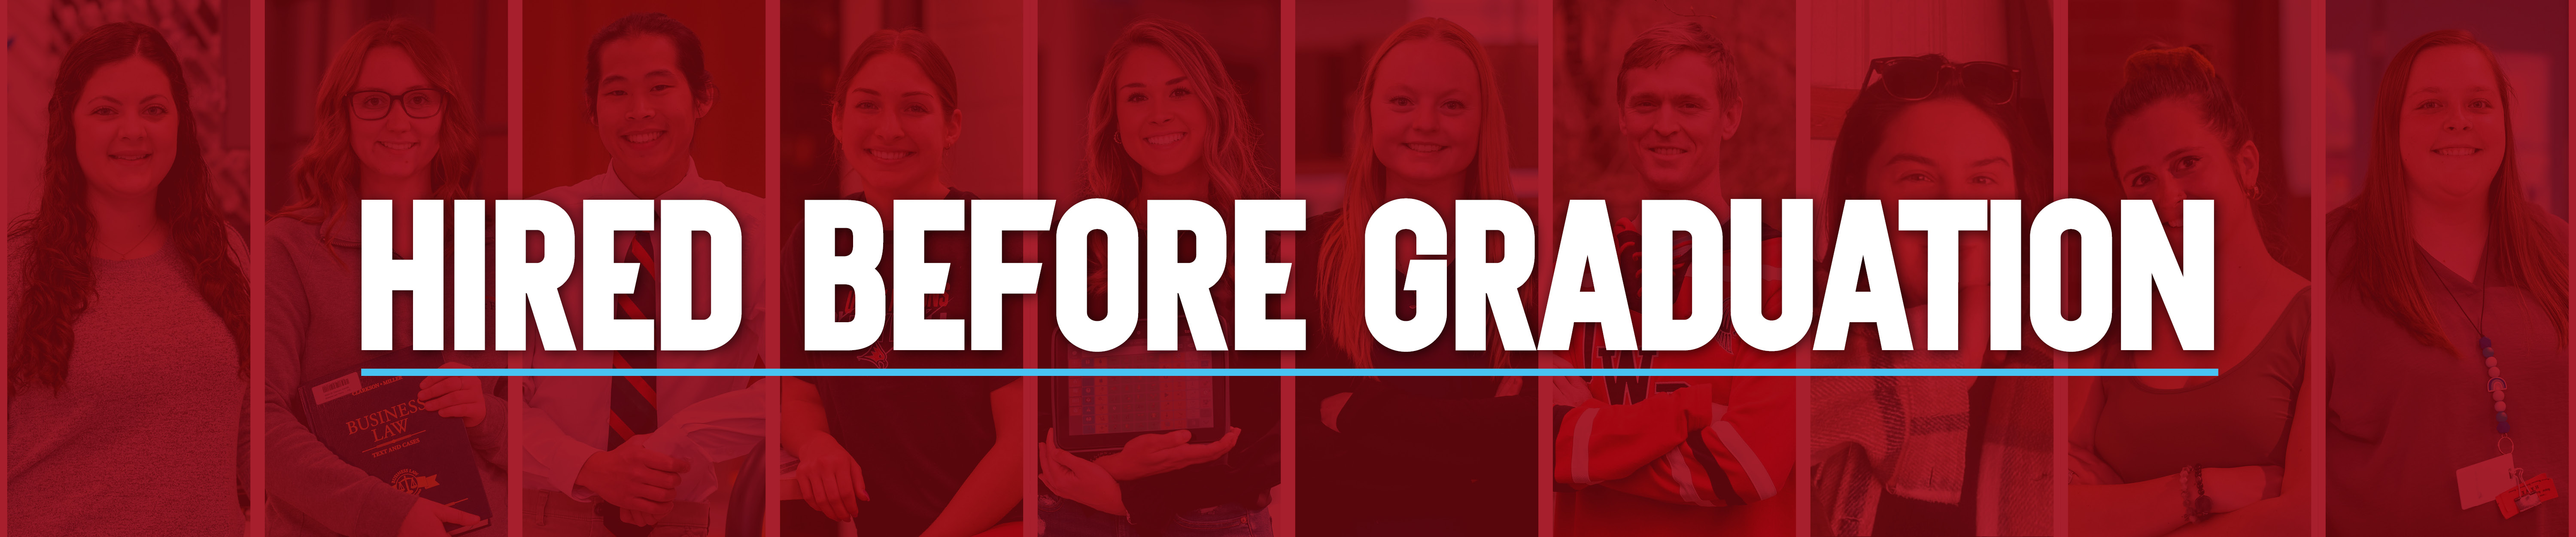 Hired Before Graduation page header